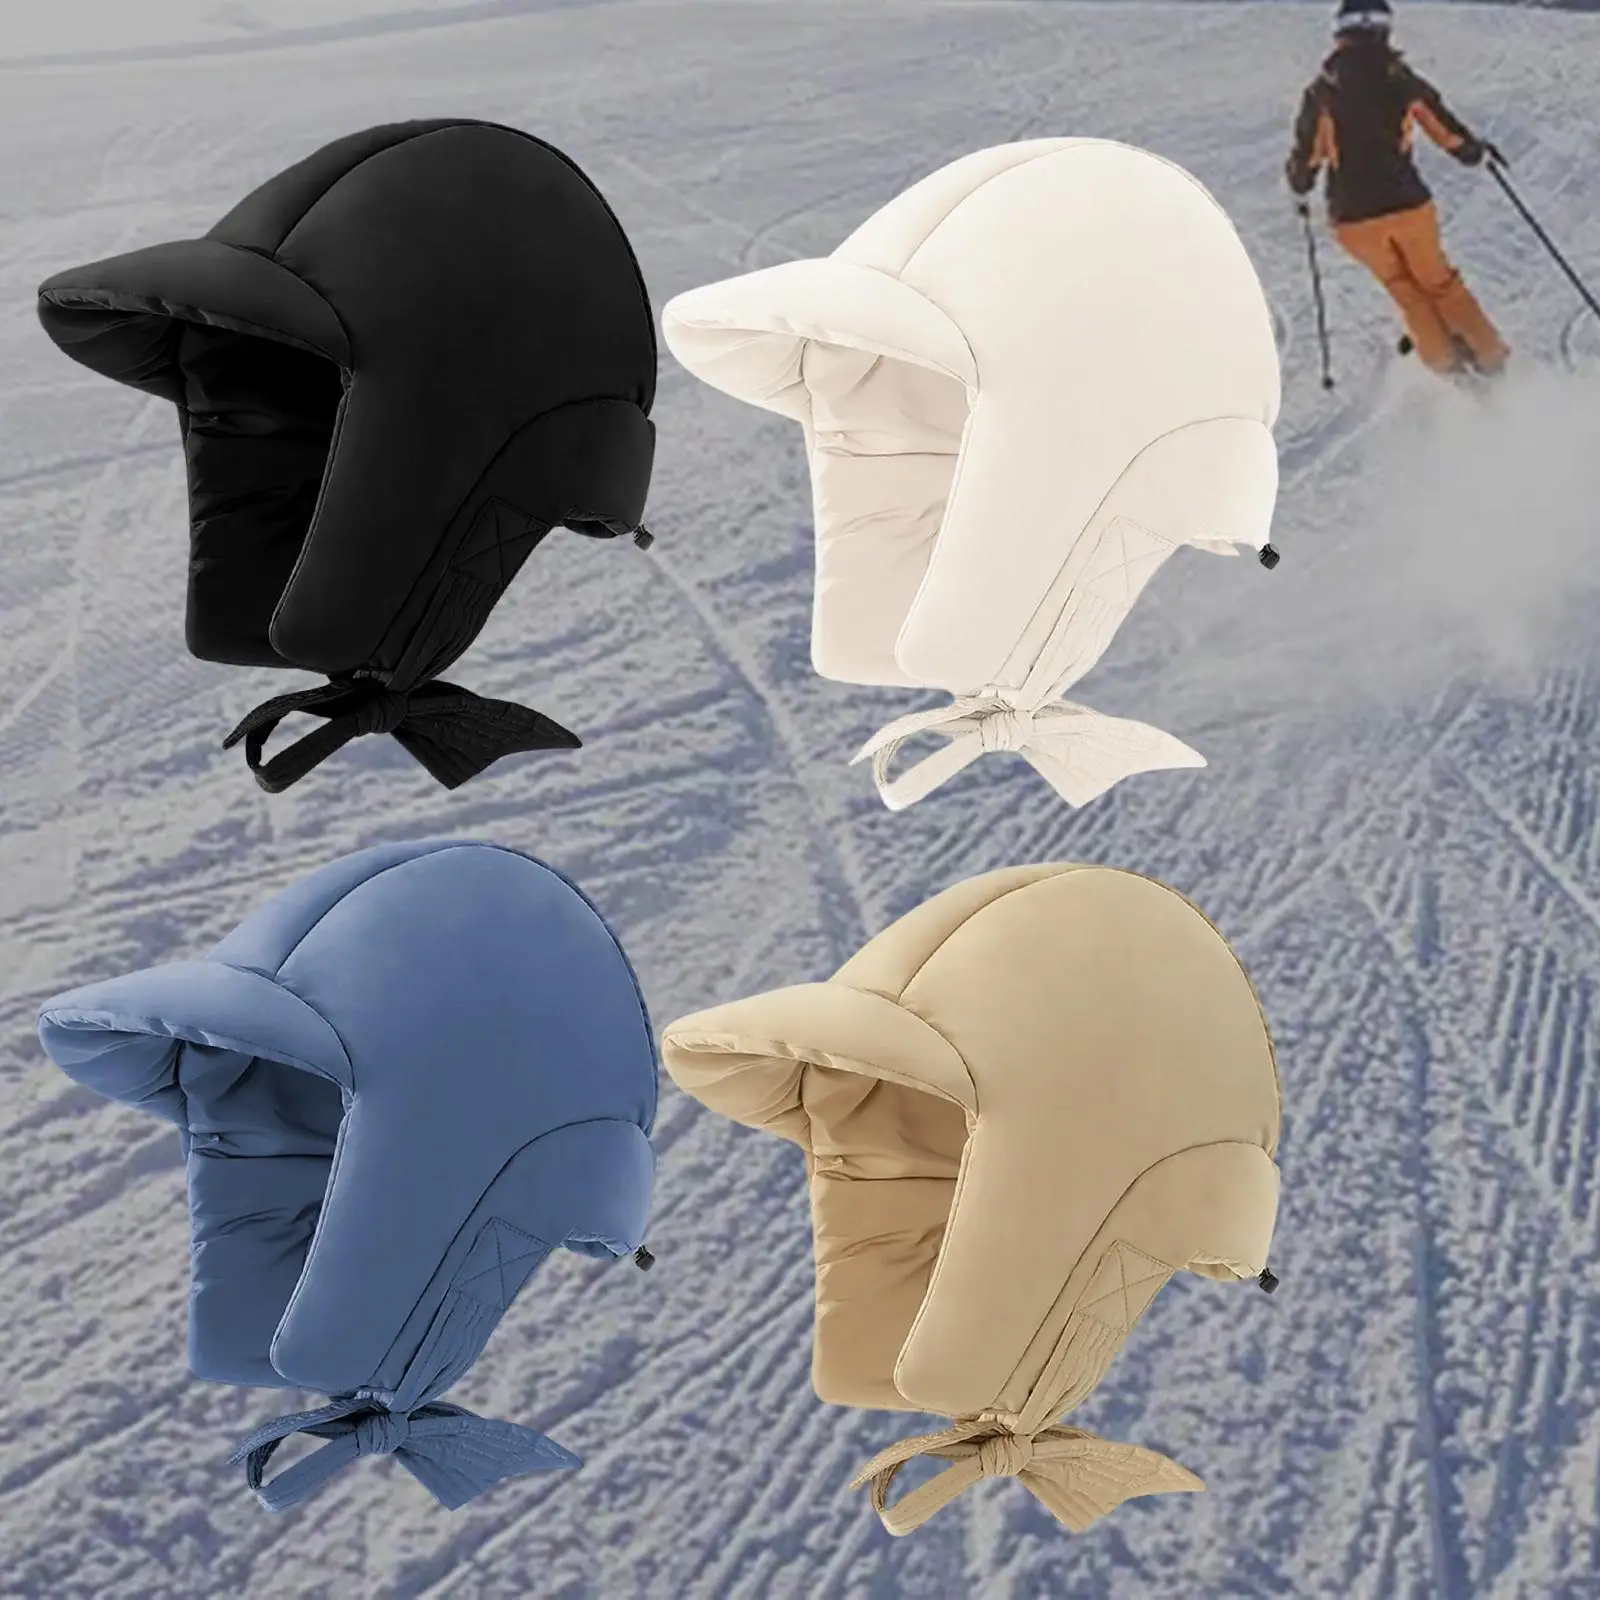 Windproof Duck Down Peaked Hat Thermal Waterproof Down Hat with Earflaps Cap Warm Hat for Cold Weather Snow Sports Camping